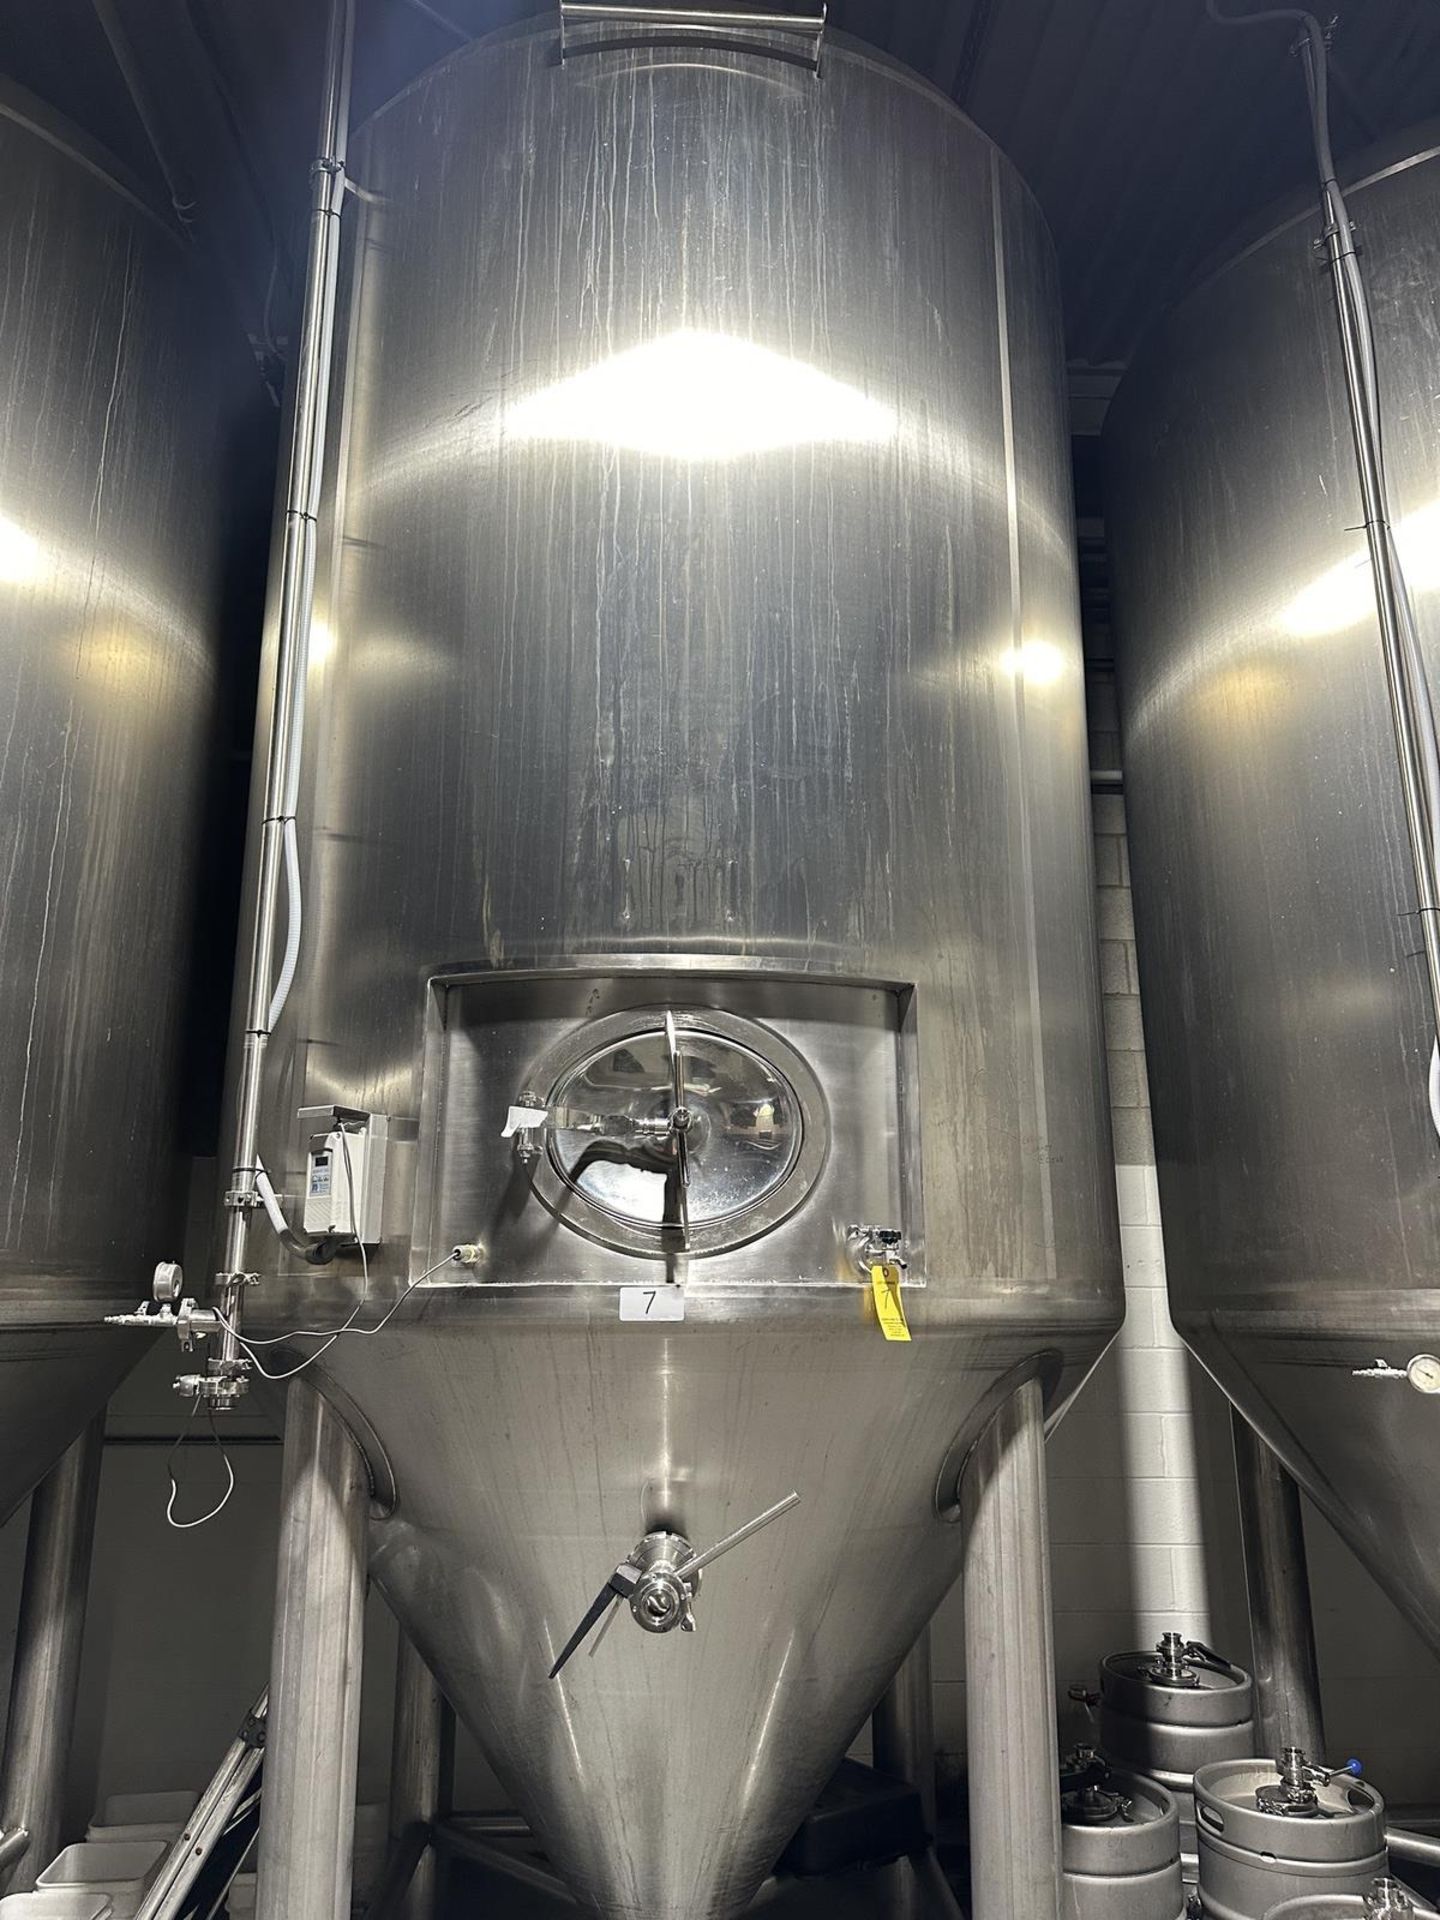 Criveller 60 BBL Stainless Steel Fermenter, Glycol Jacketed, Nema 4X Electronic Tem | Rig Fee $350 - Image 4 of 6